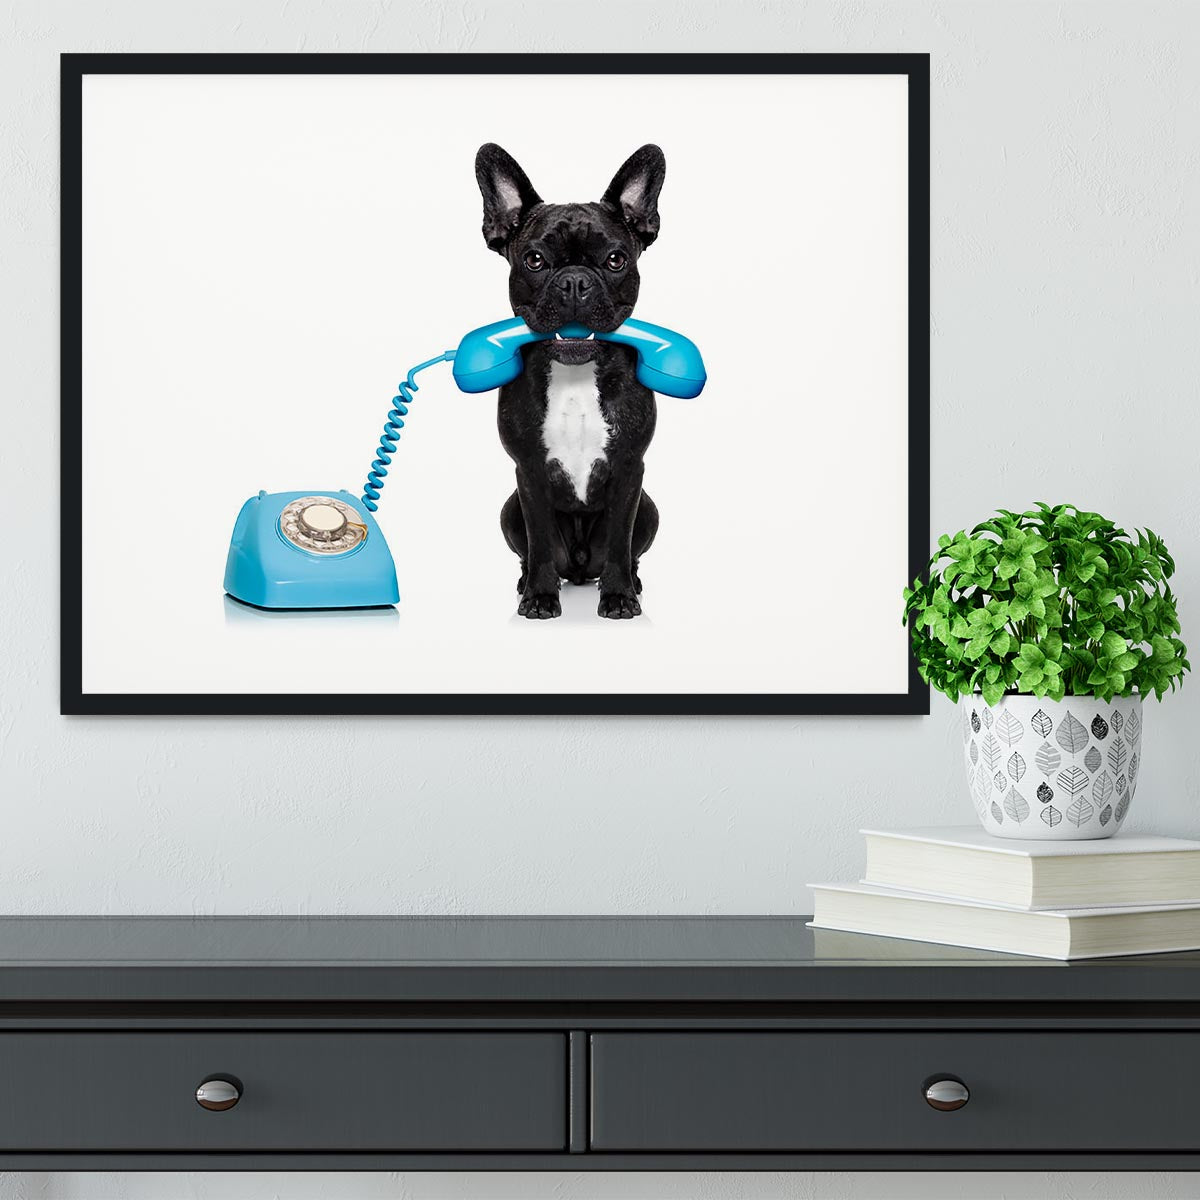 French bulldog dog on the phone or telephone in mouth Framed Print - Canvas Art Rocks - 1